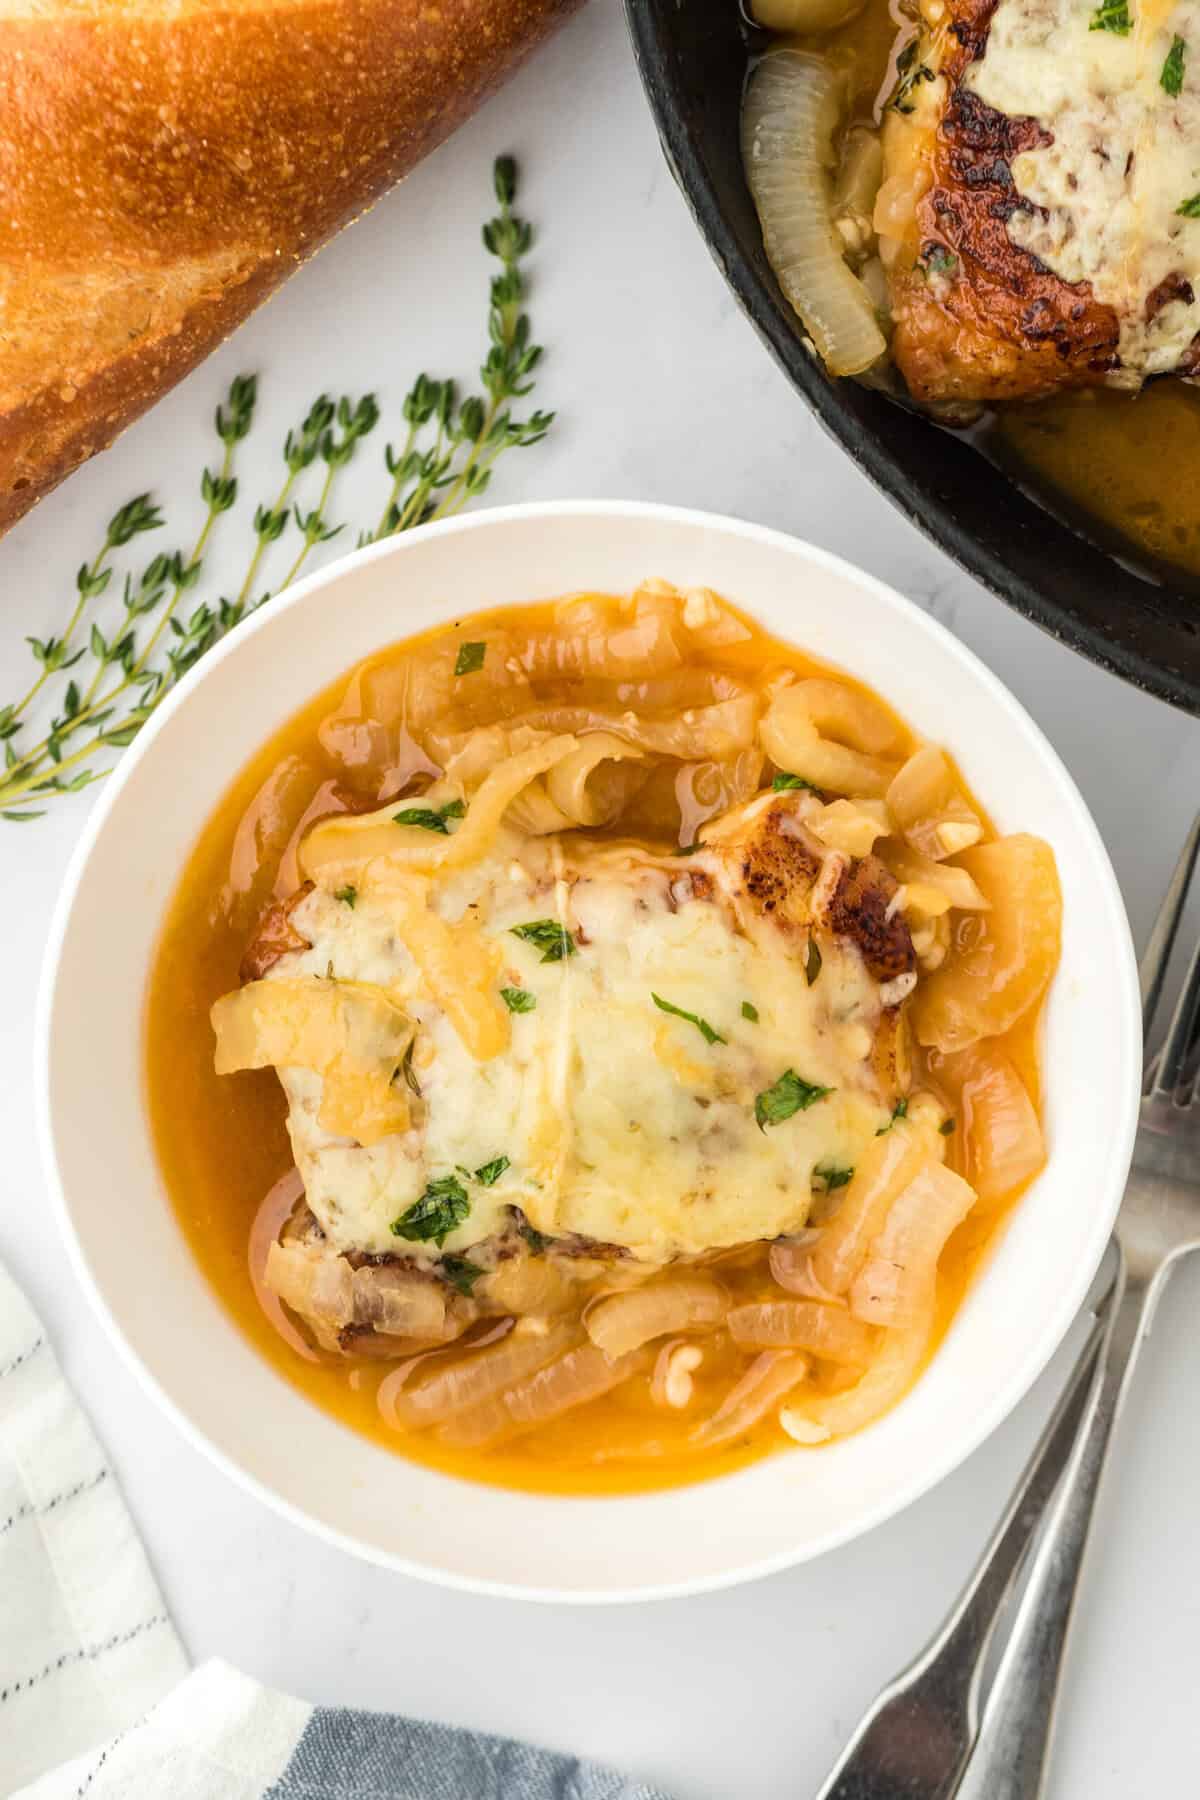 French onion chicken in a white bowl, topped with melted cheese and a generous amount of caramelized onion broth. In the background, there's a baguette, fresh parsley, and a fork